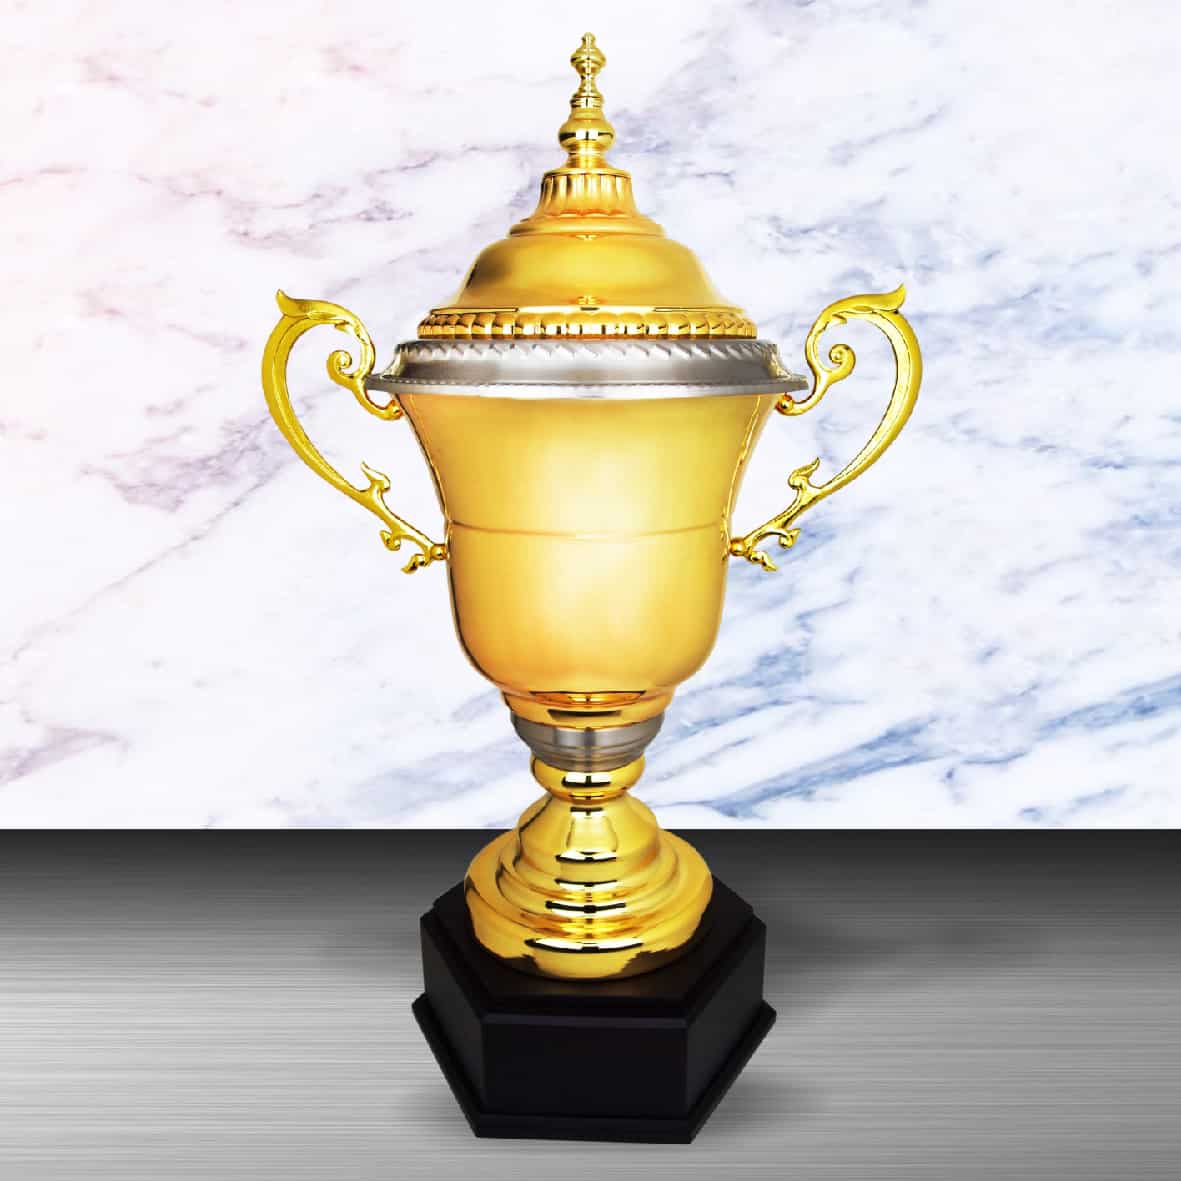 Silver Metal Trophy in Gold at Clazz Trophy Malaysia | #1 Rated Trophy Supplier in Malaysia